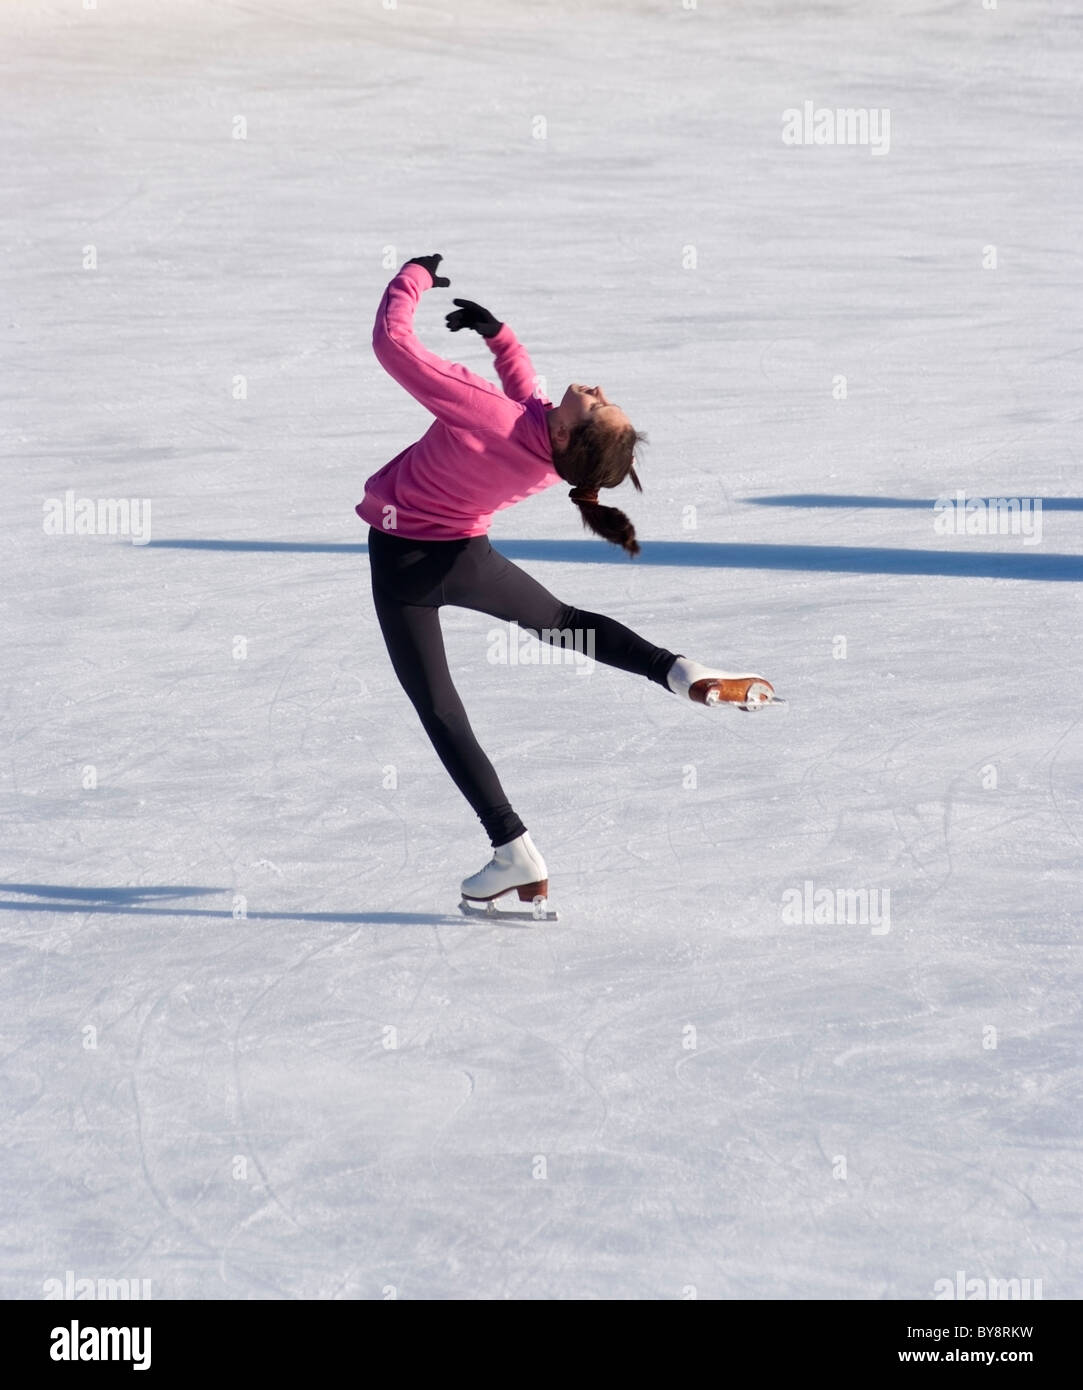 Young female figure skater doing a layback spin at the North Park Ice Skating Rink in Allison Park near Pittsburgh, PA, USA Stock Photo